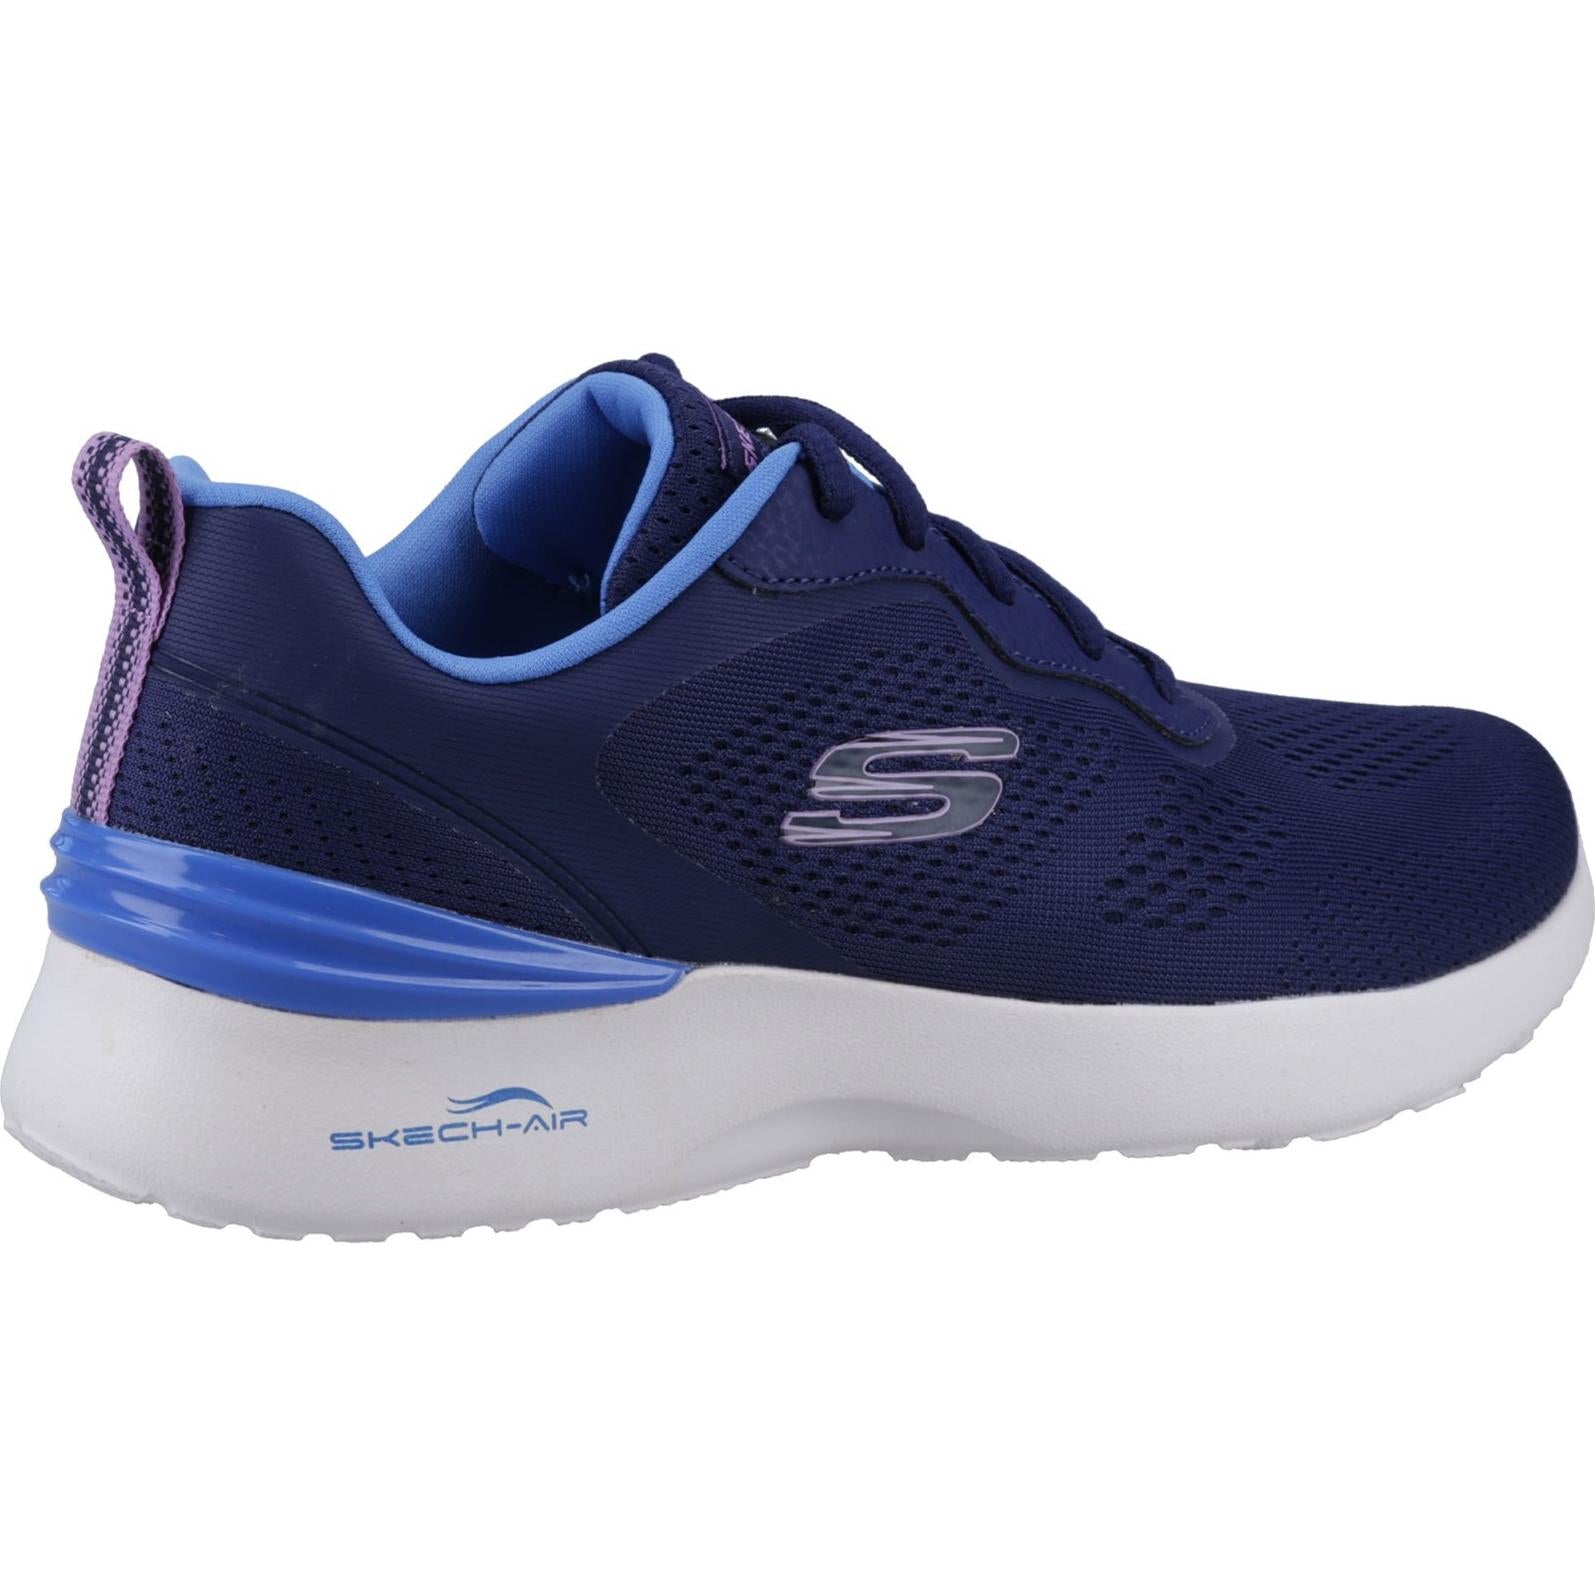 Skechers Skech-Air Dynamight New Grind Trainers